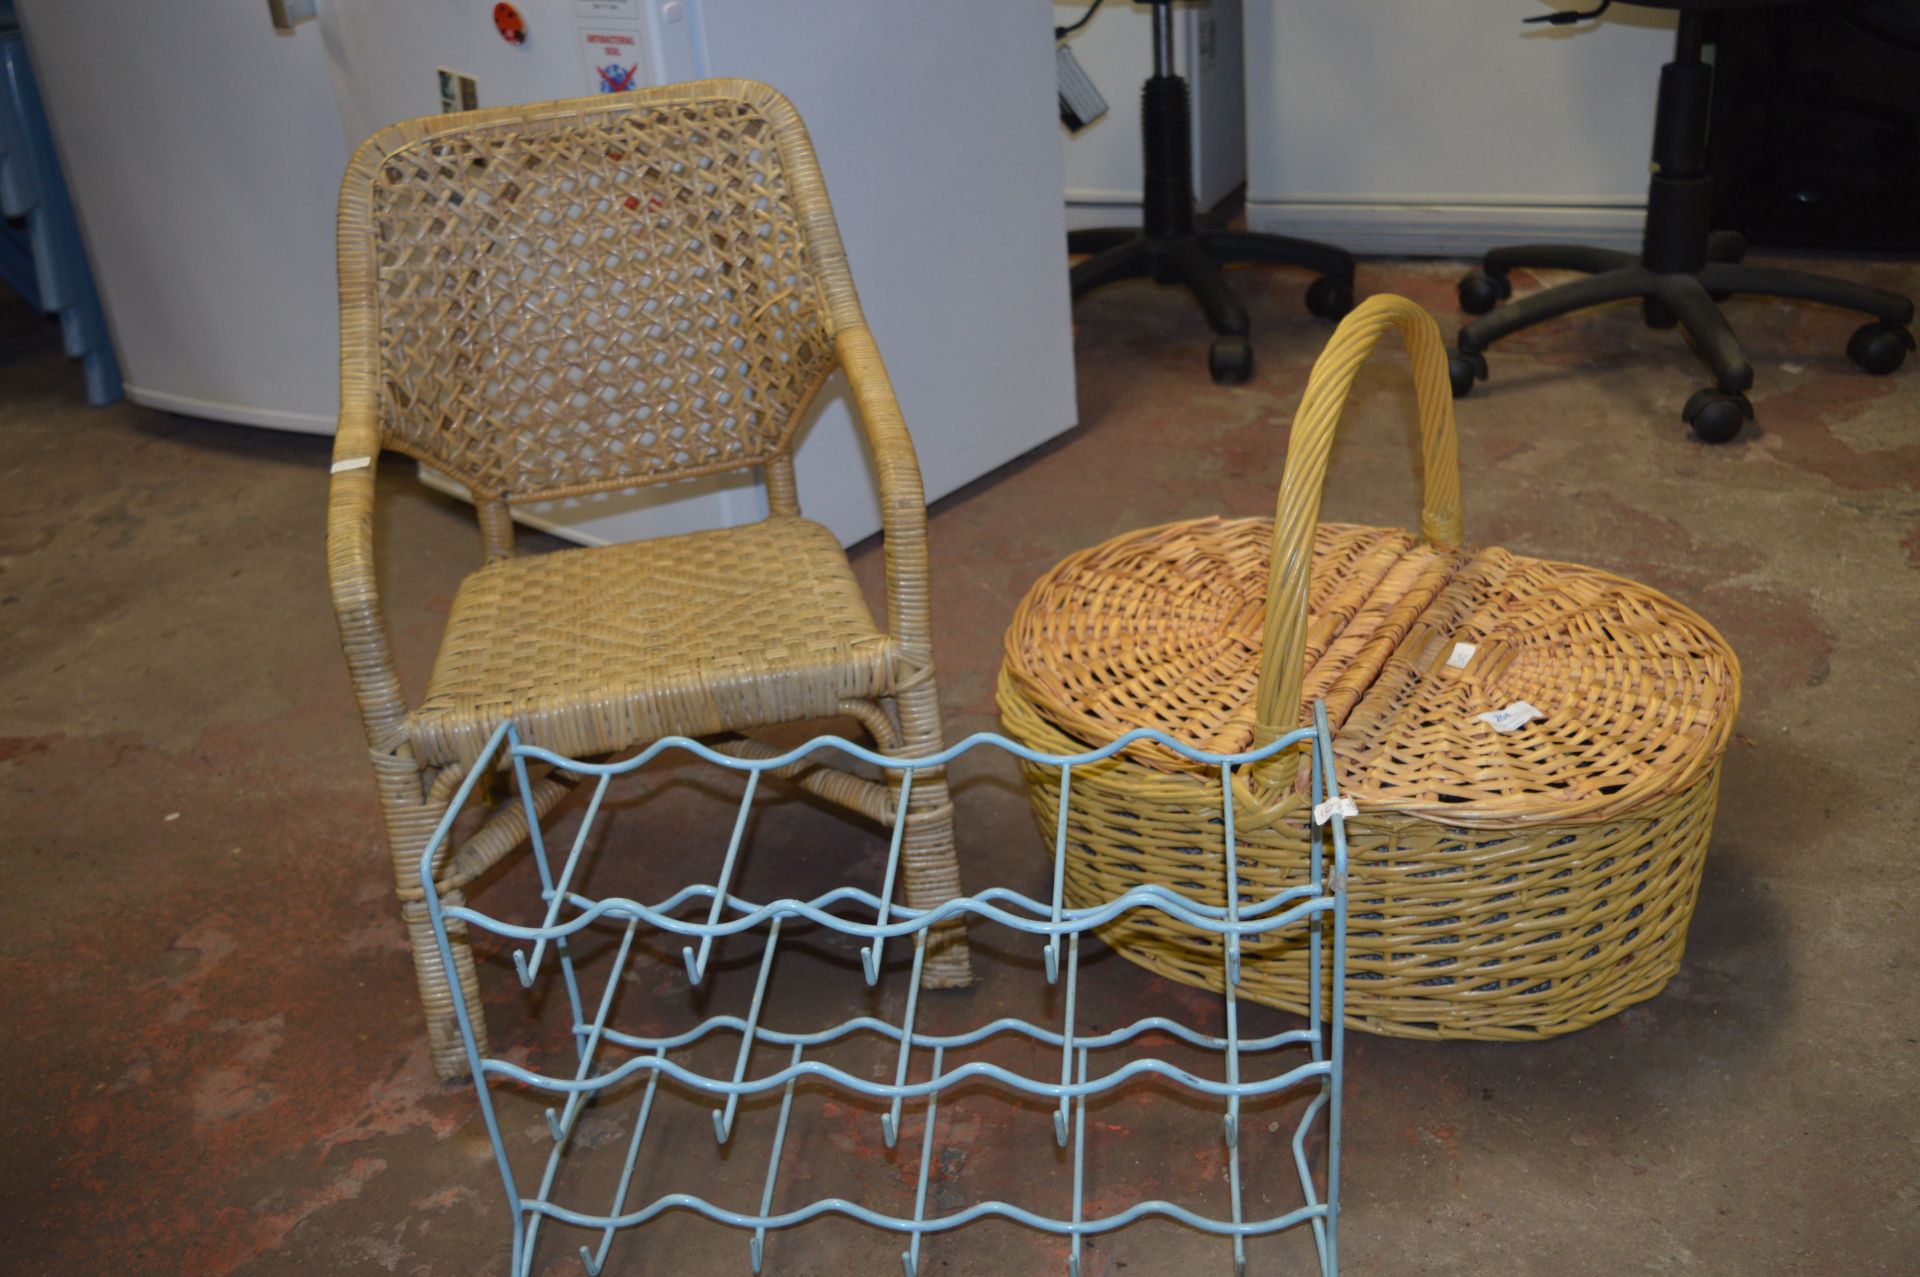 Childs Wicker Chair, Picnic Basket and a Wine Rack